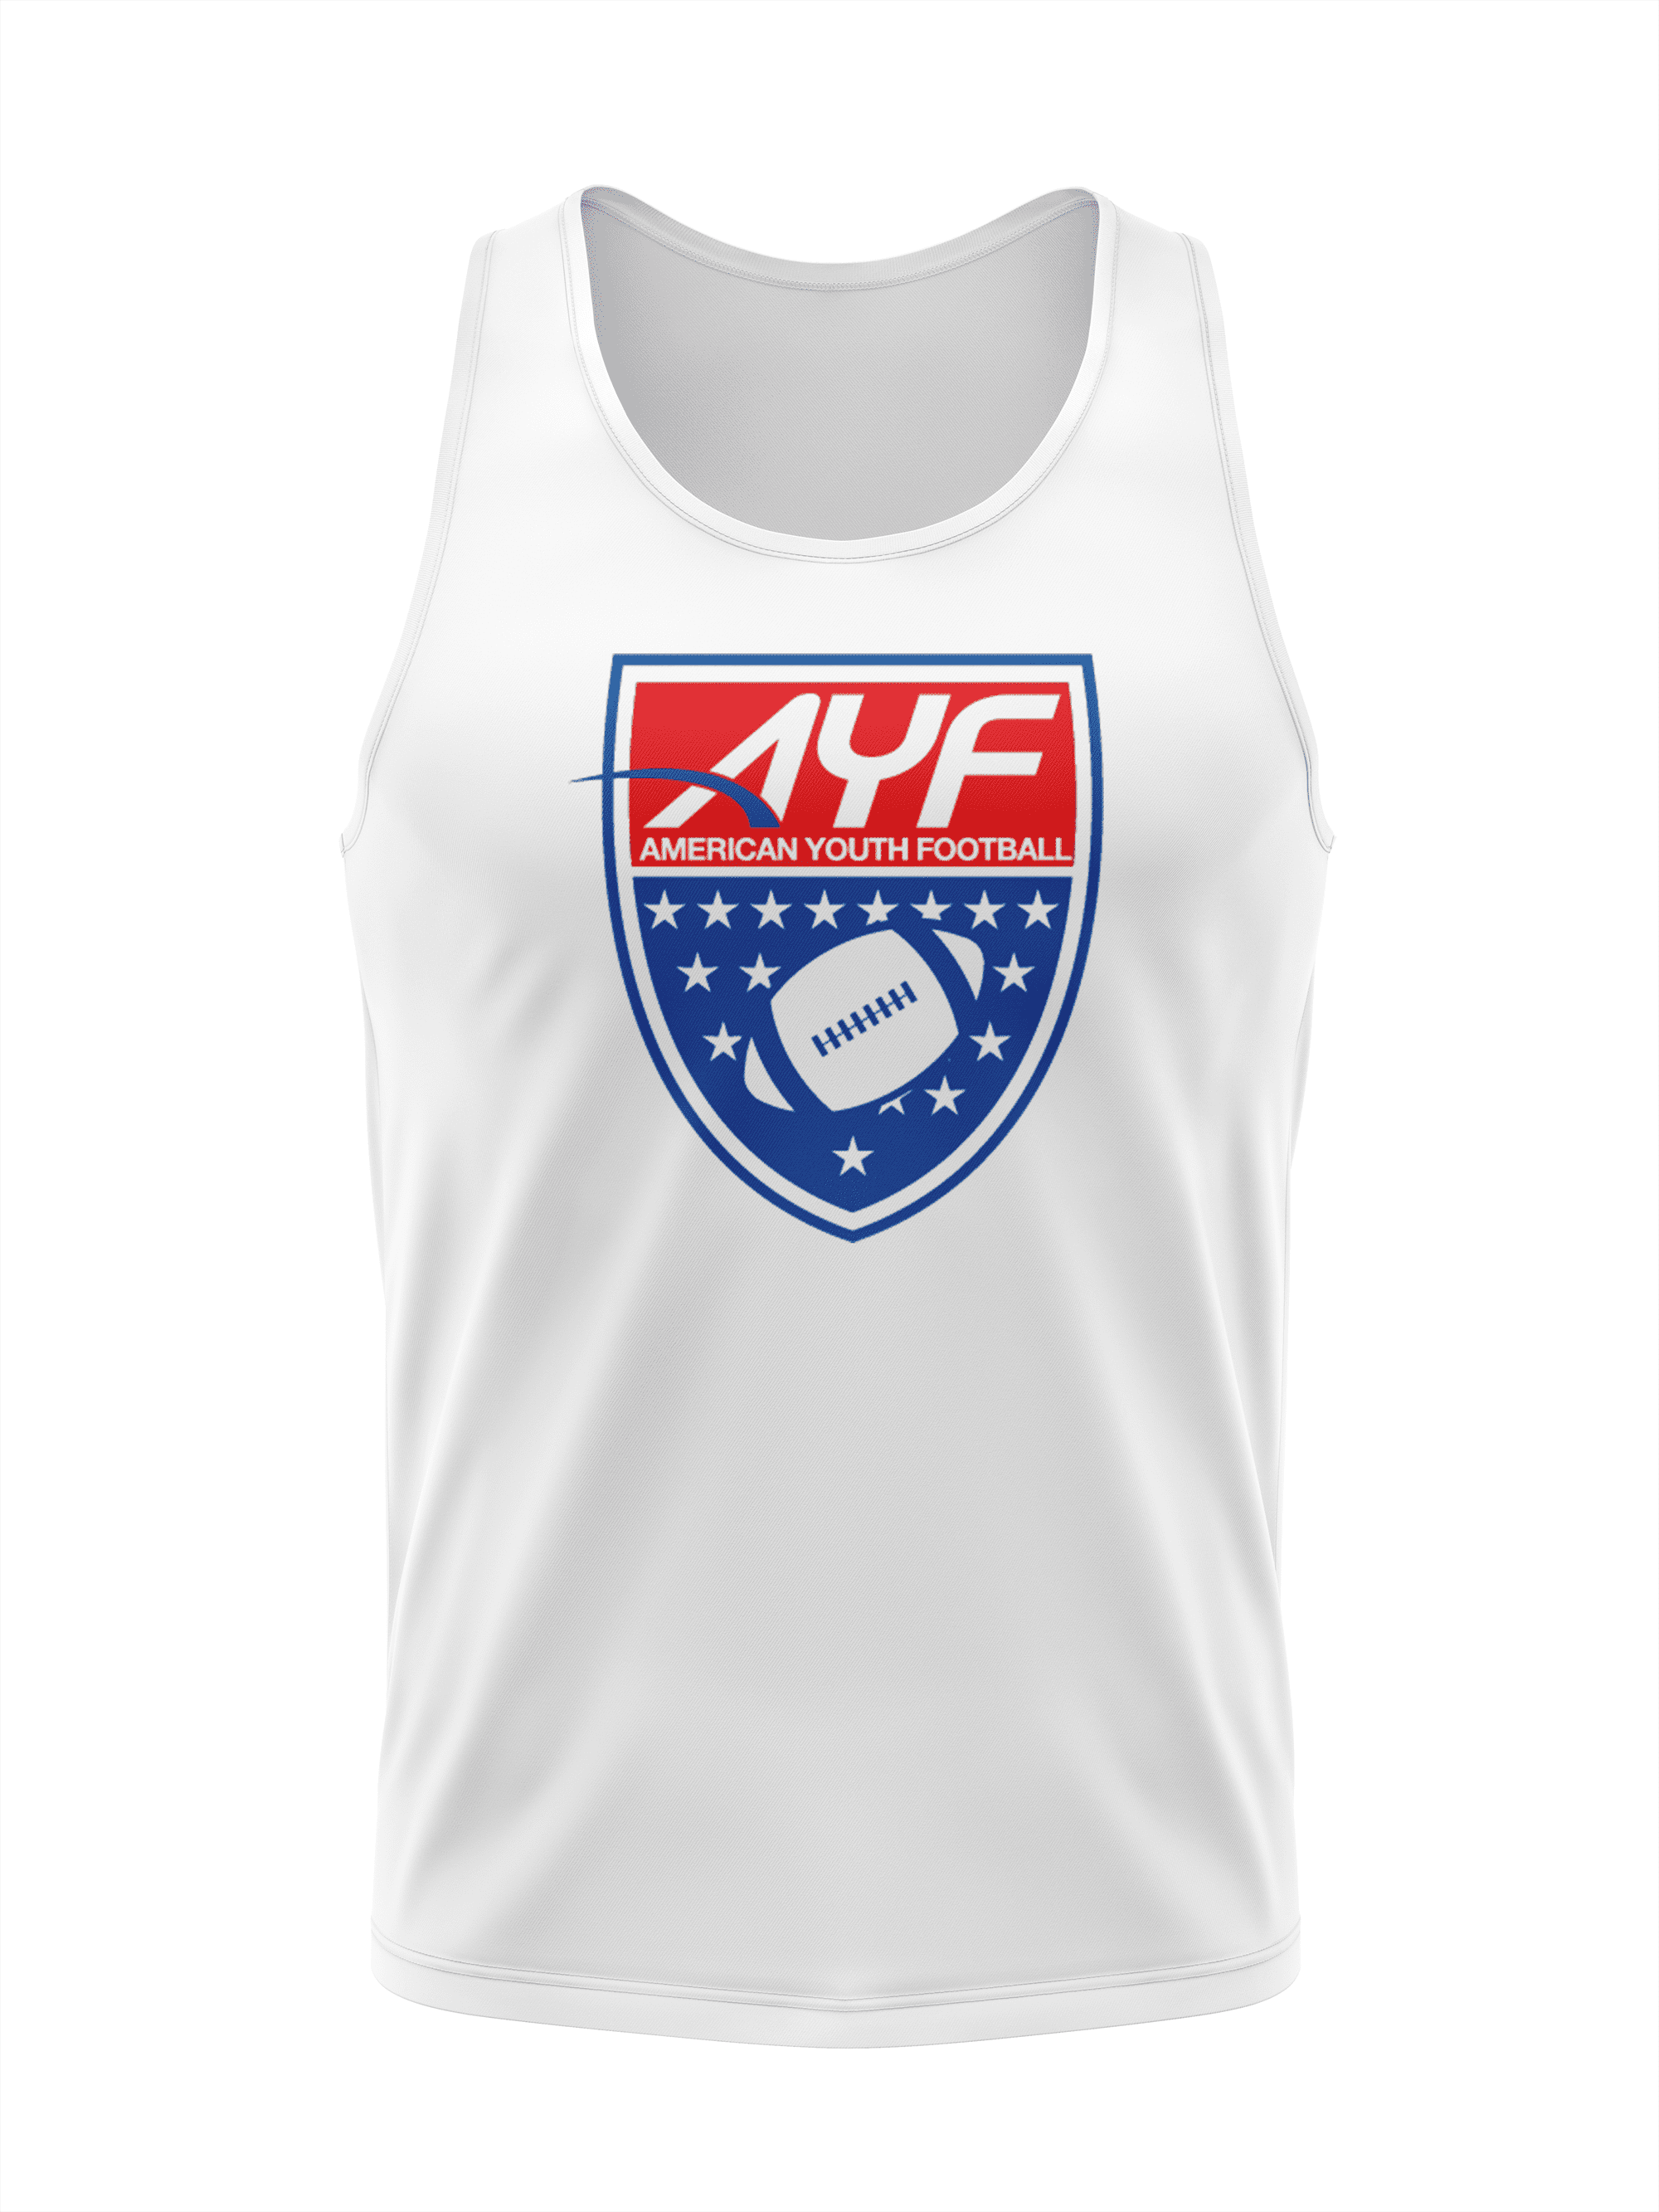 AYF Full Dye Sublimated Womens Racerback (6 Colors)